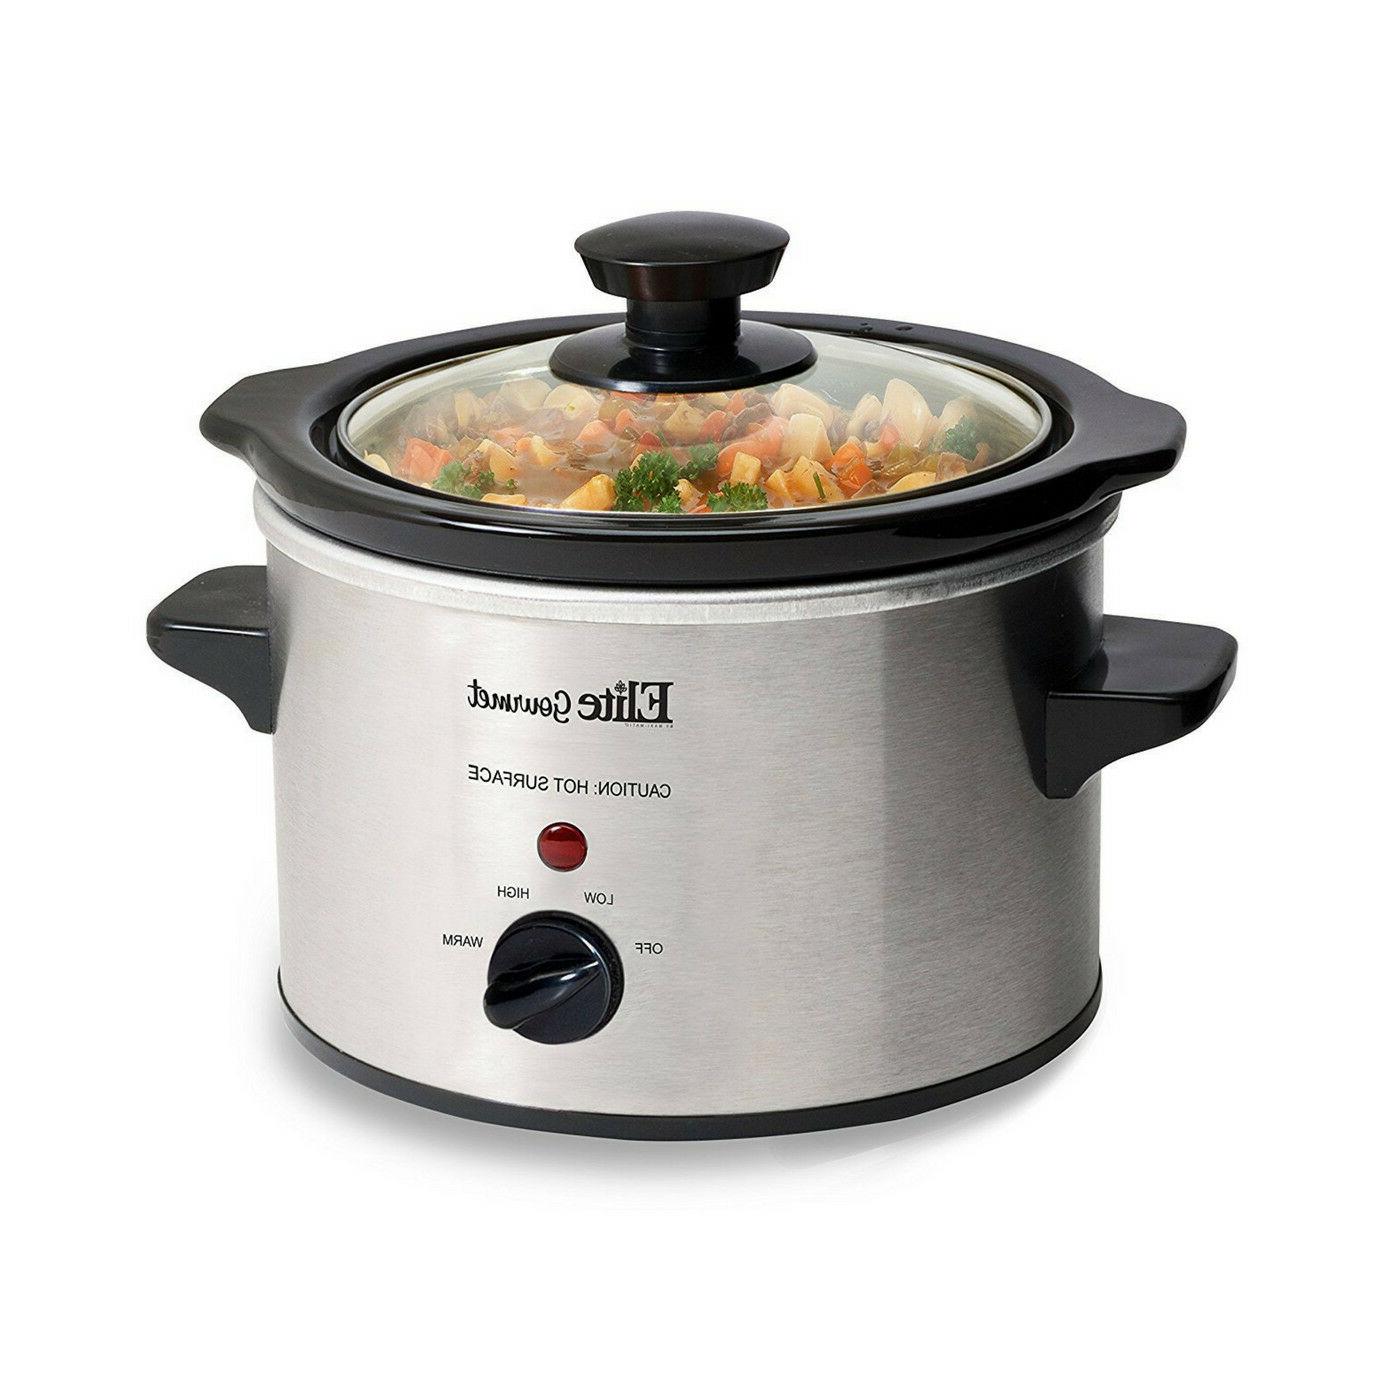 Small Slow Cooker Mini Compact Crock Pot Lunch